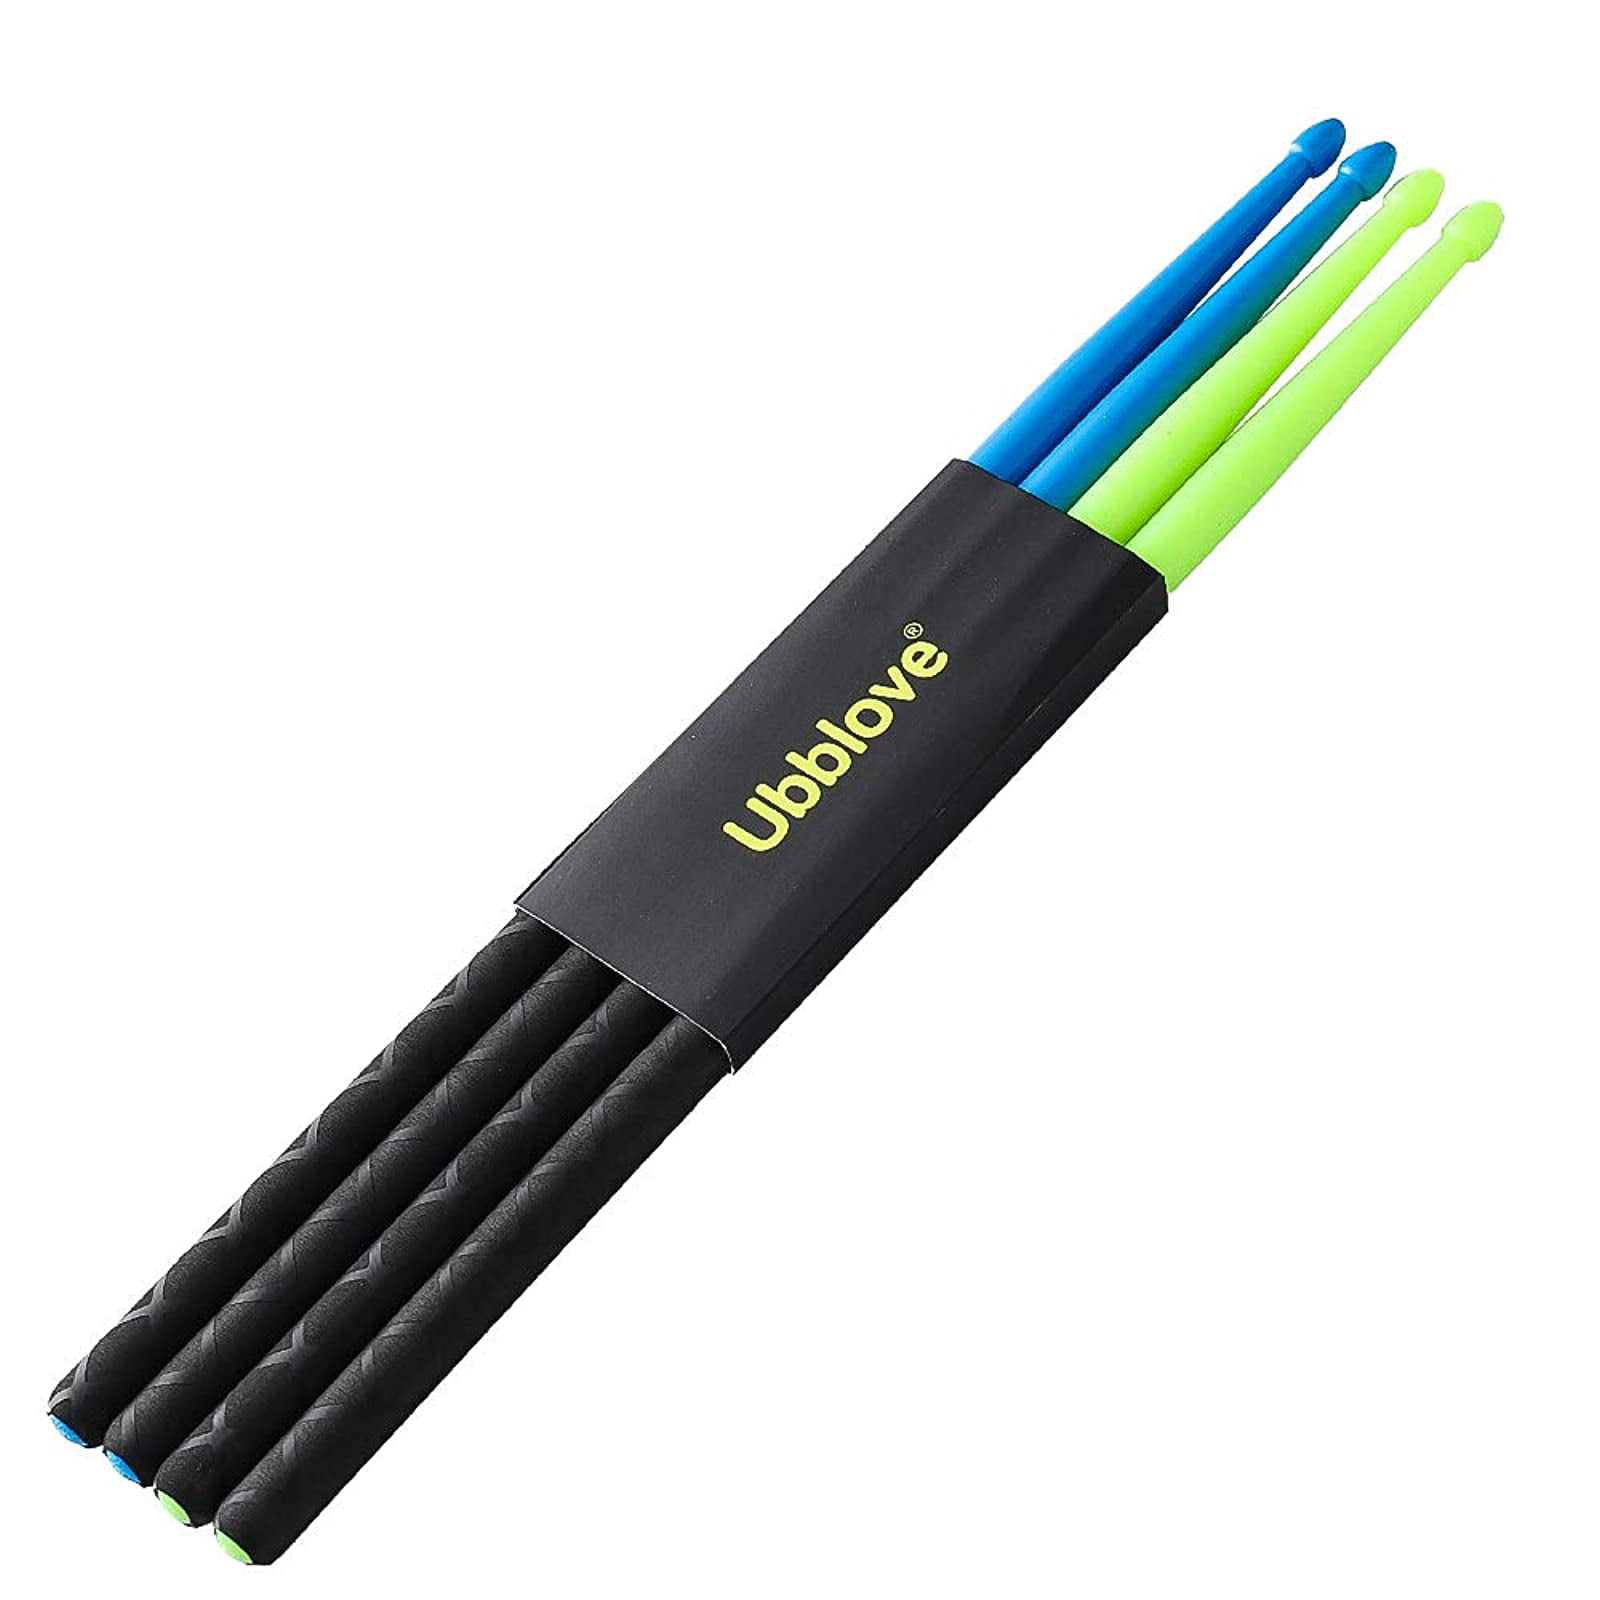 Blue and Green 2 Pairs Drumsticks for Drum Light Durable Plastic 5A Drum Sticks for Kids Adults Musical Instrument Percussion Accessories